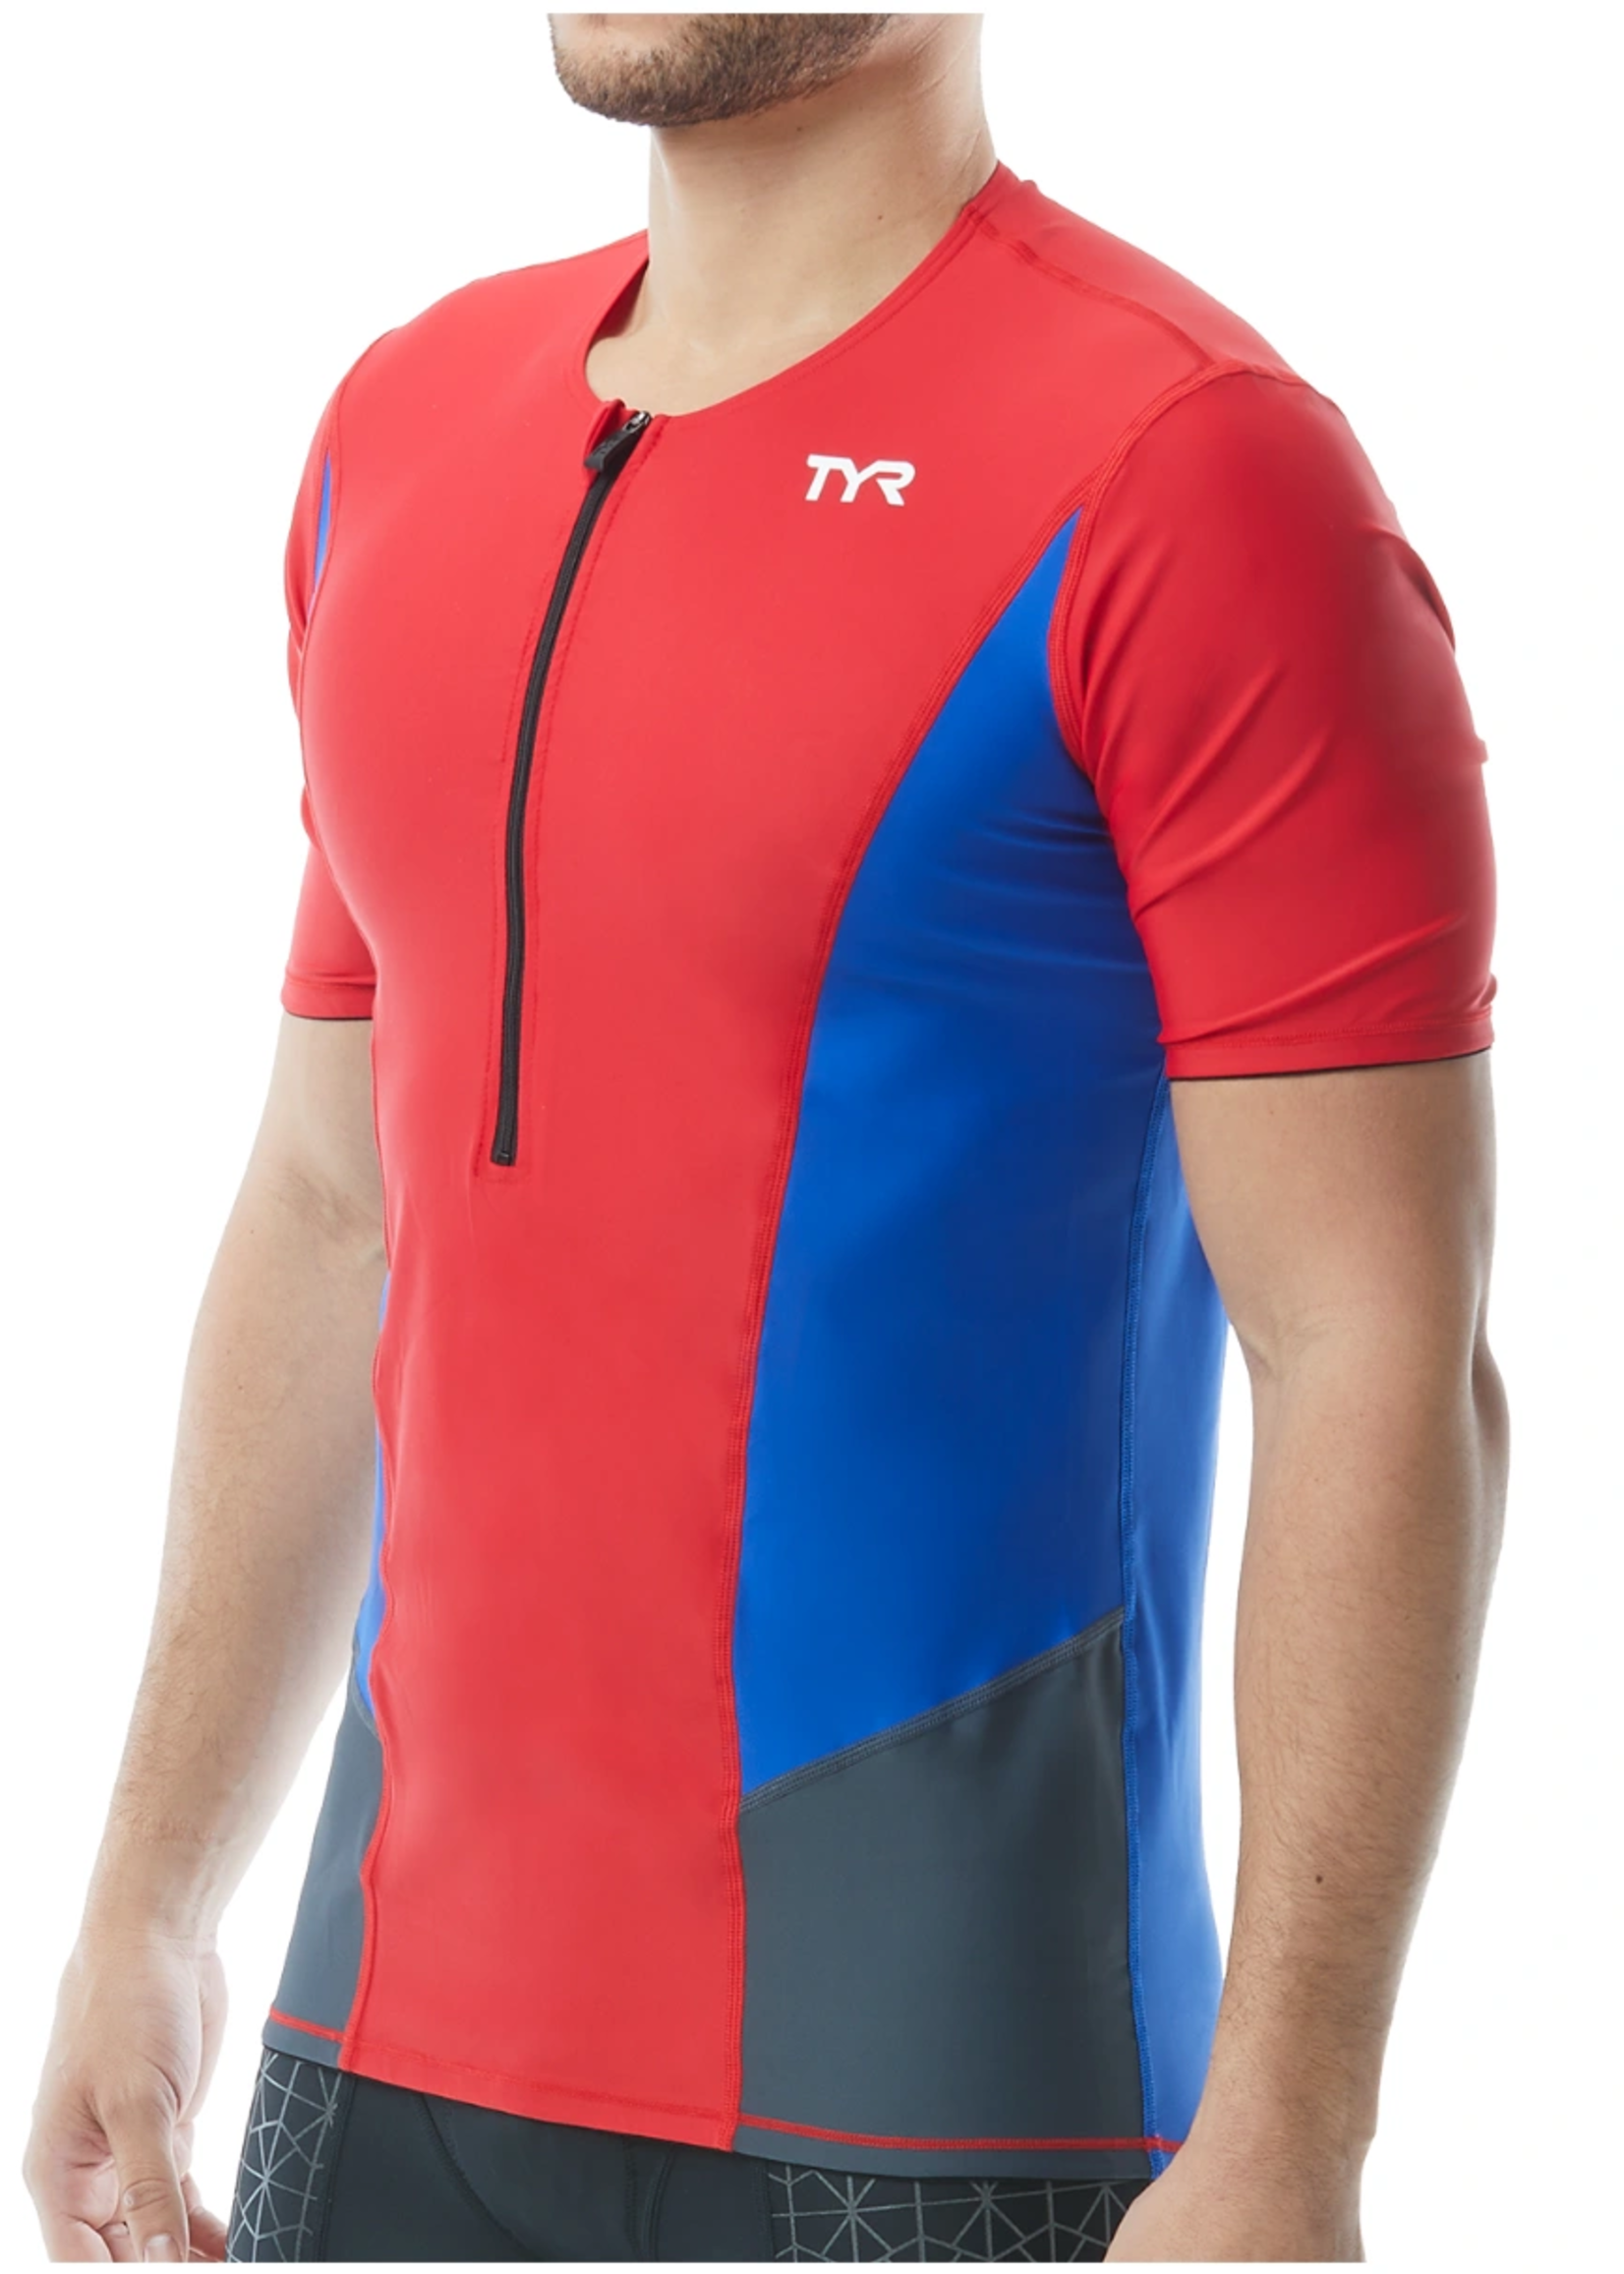 Mens Competitor Short Sleeve Top 583 Red/Blue/Grey